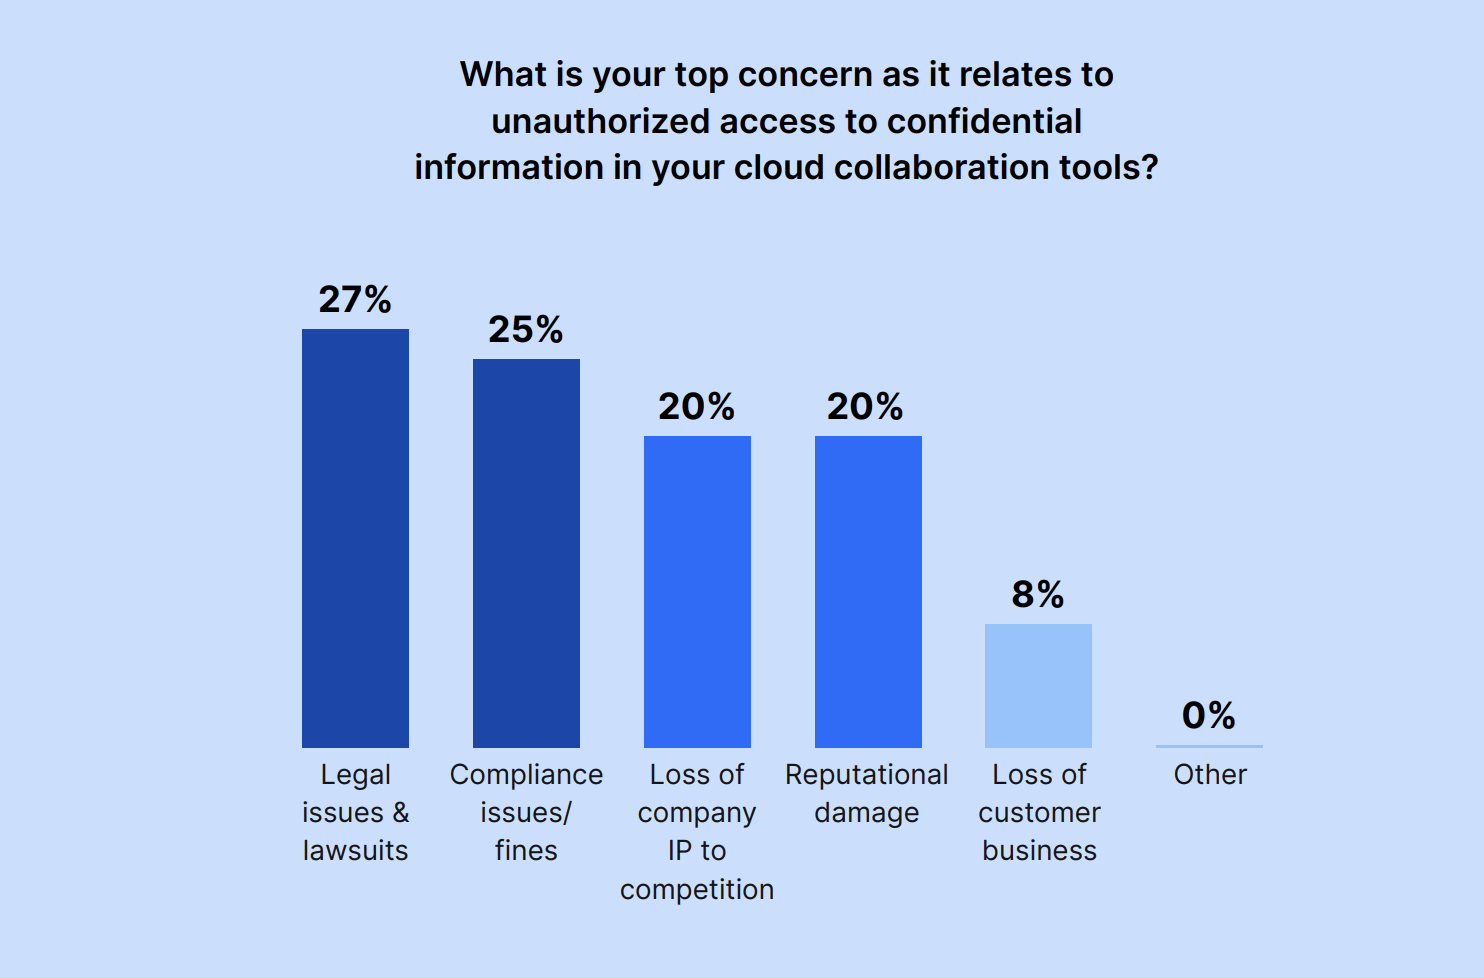 What is your top concern as it relates to unauthorized access to confidential information in your cloud collaboration tools?